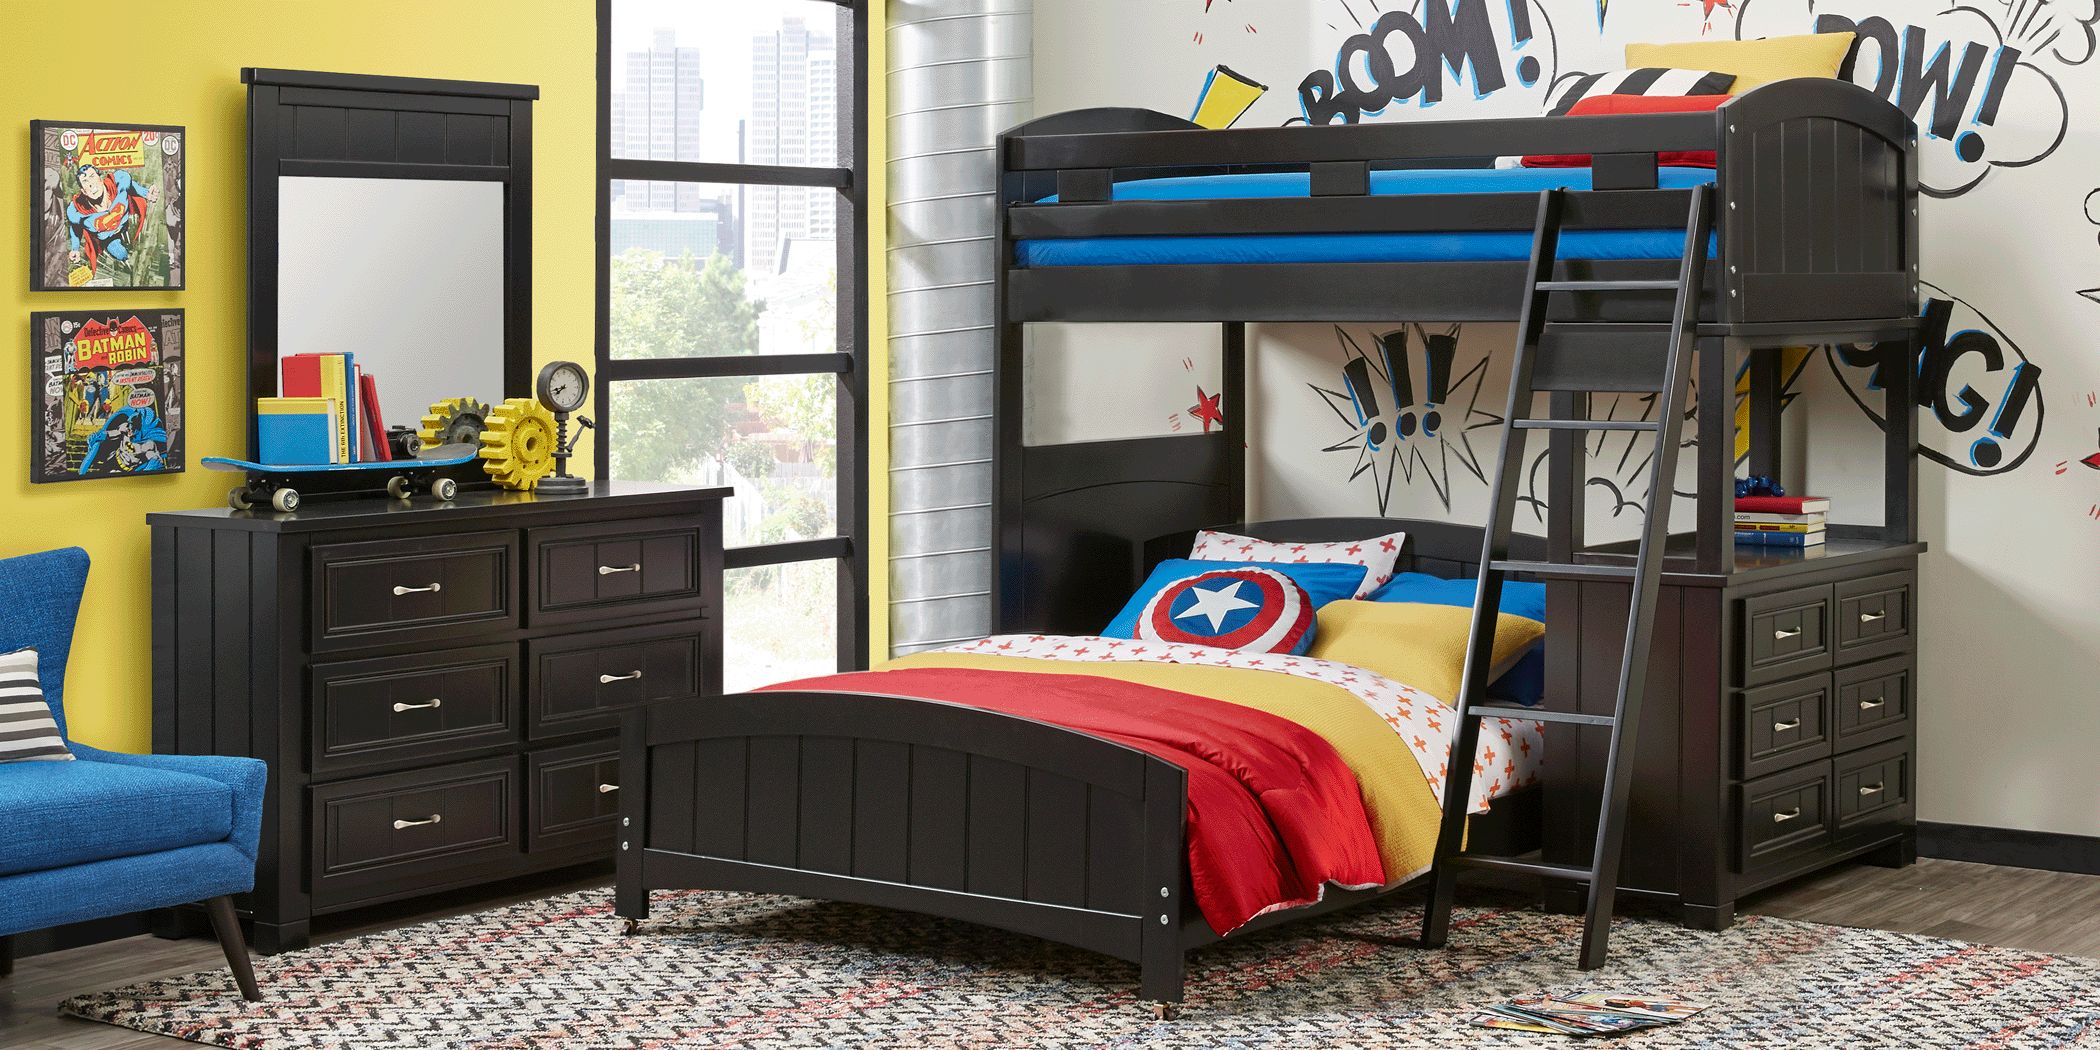 Bunk Beds For Kids, Rooms To Go Cottage Colors Bunk Bed